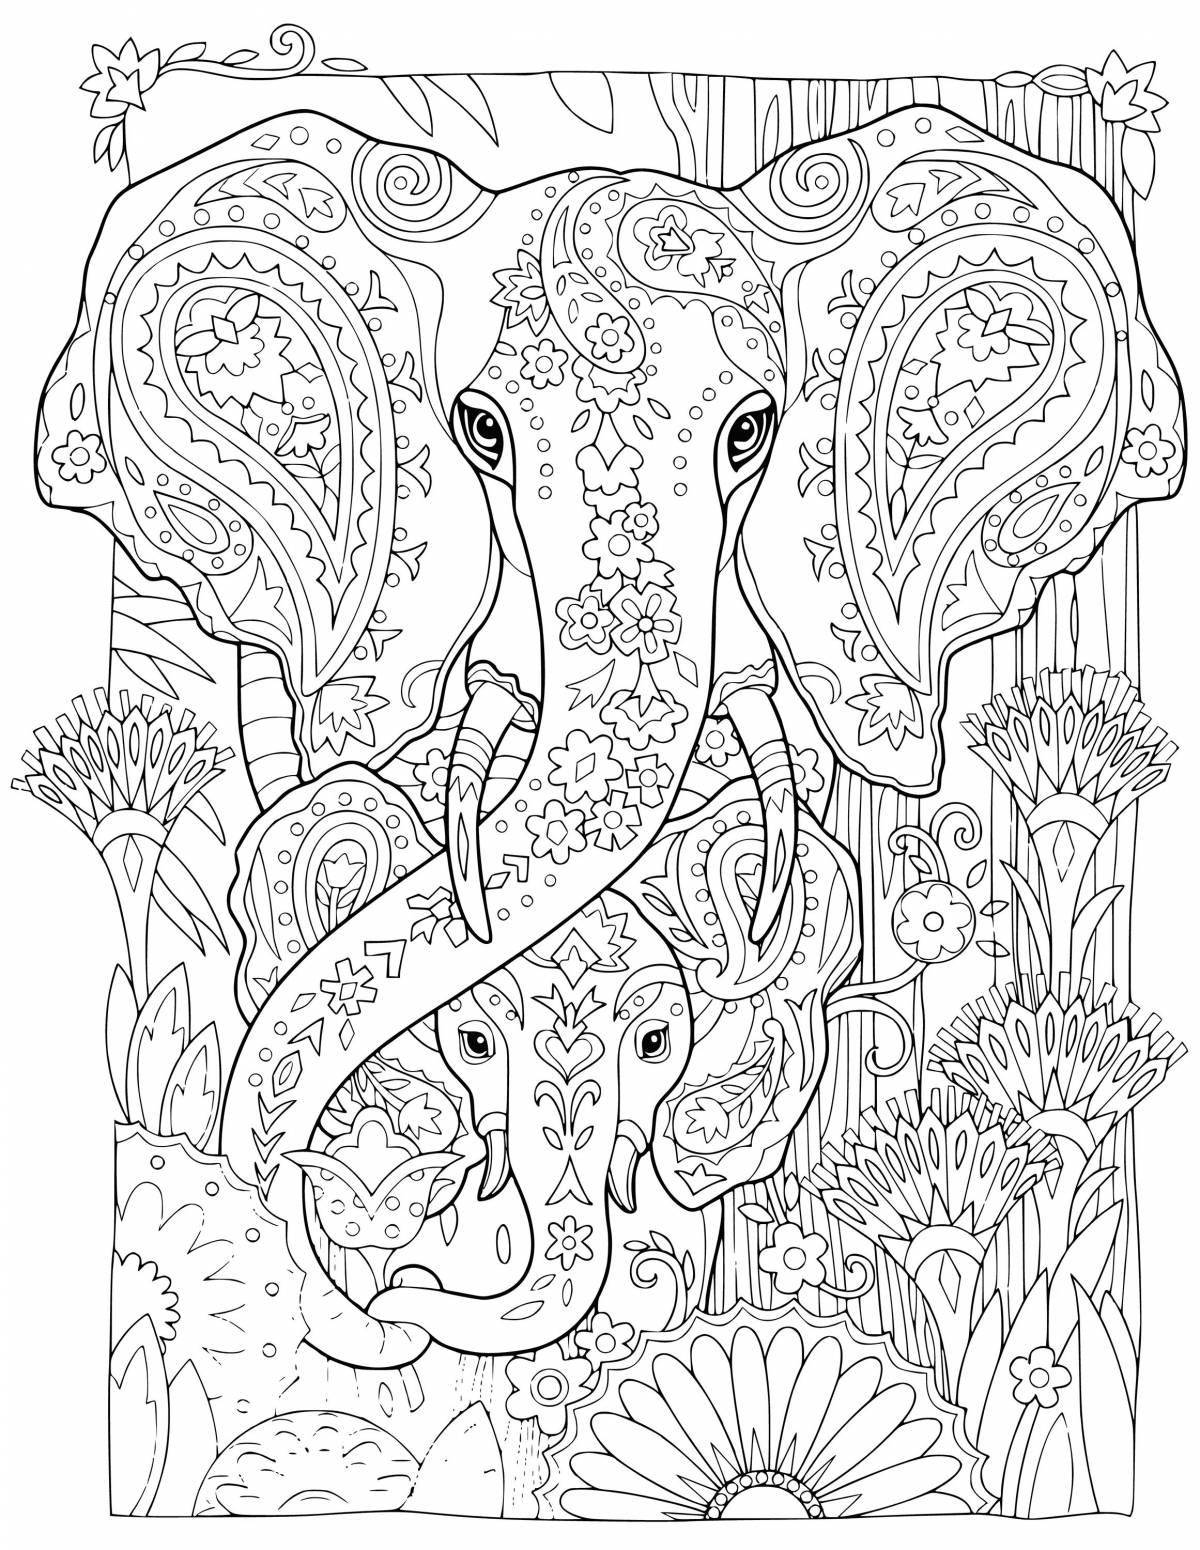 Tempting coloring page of nerves